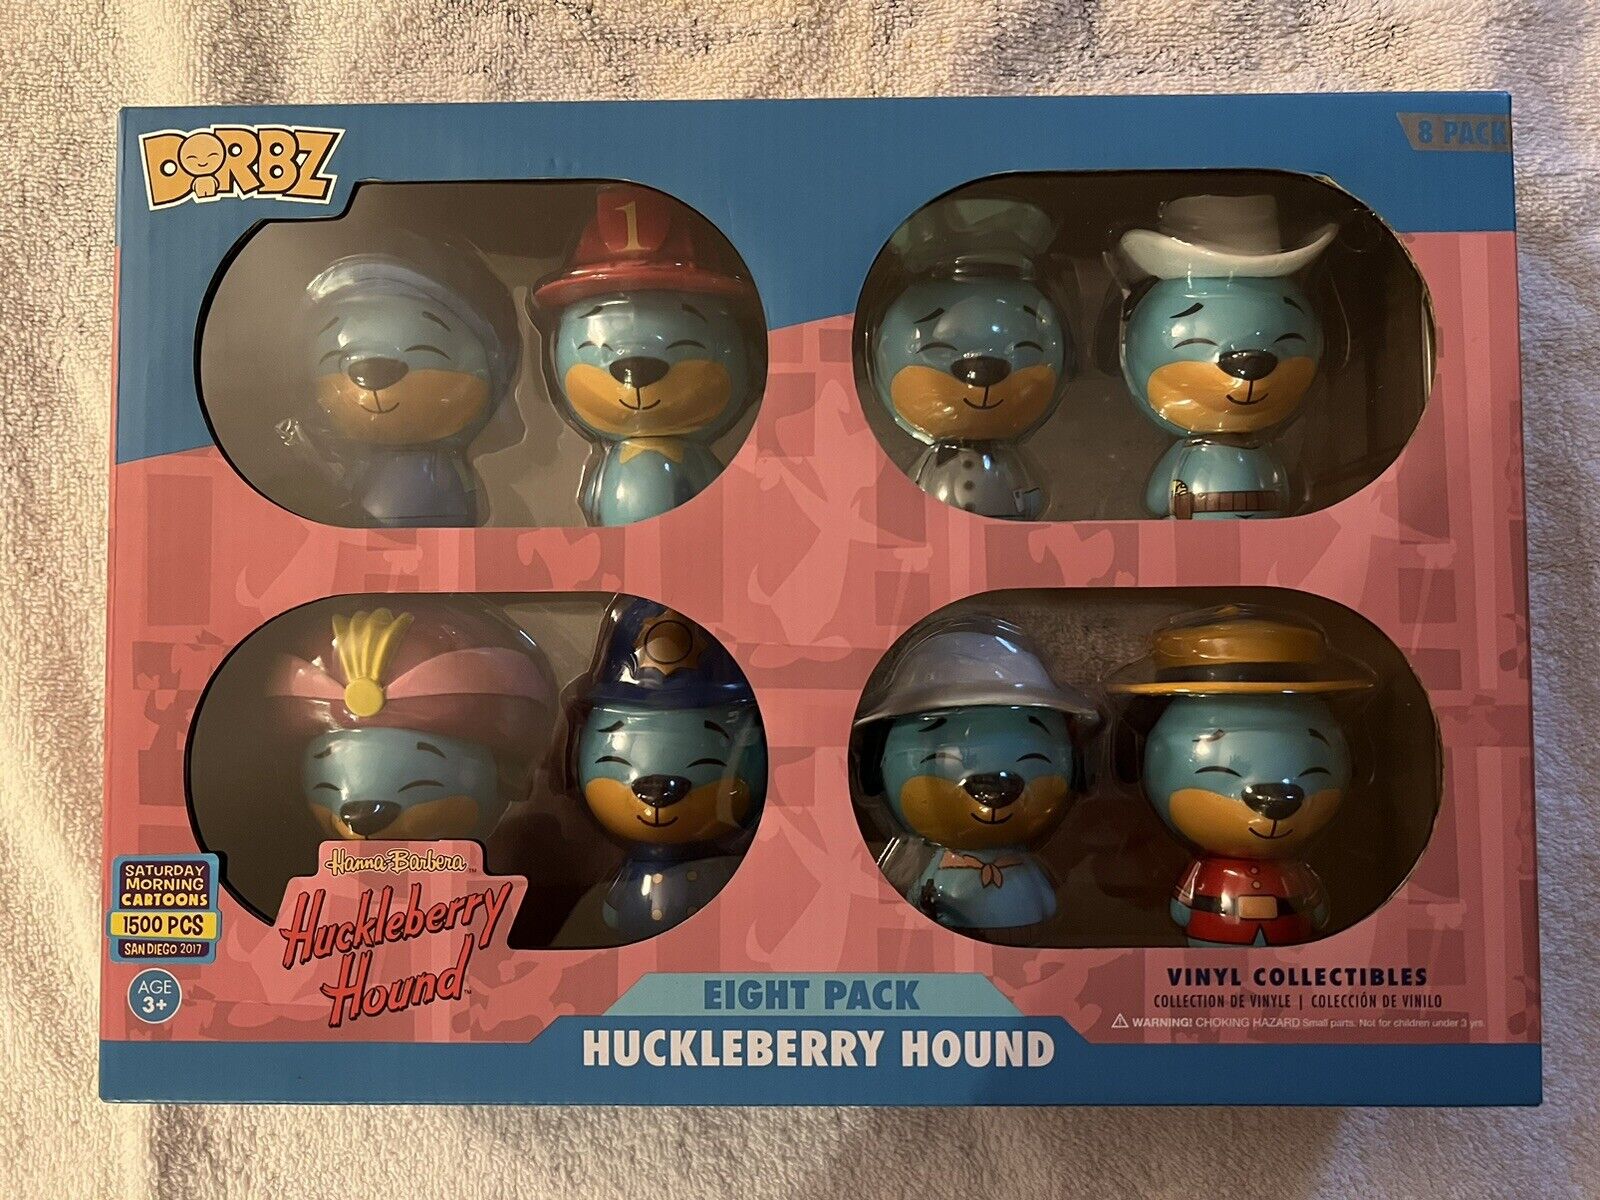 2017 SDCC Exclusive Funko Dorbz Huckleberry Hound 8-pack LE 1500 Made